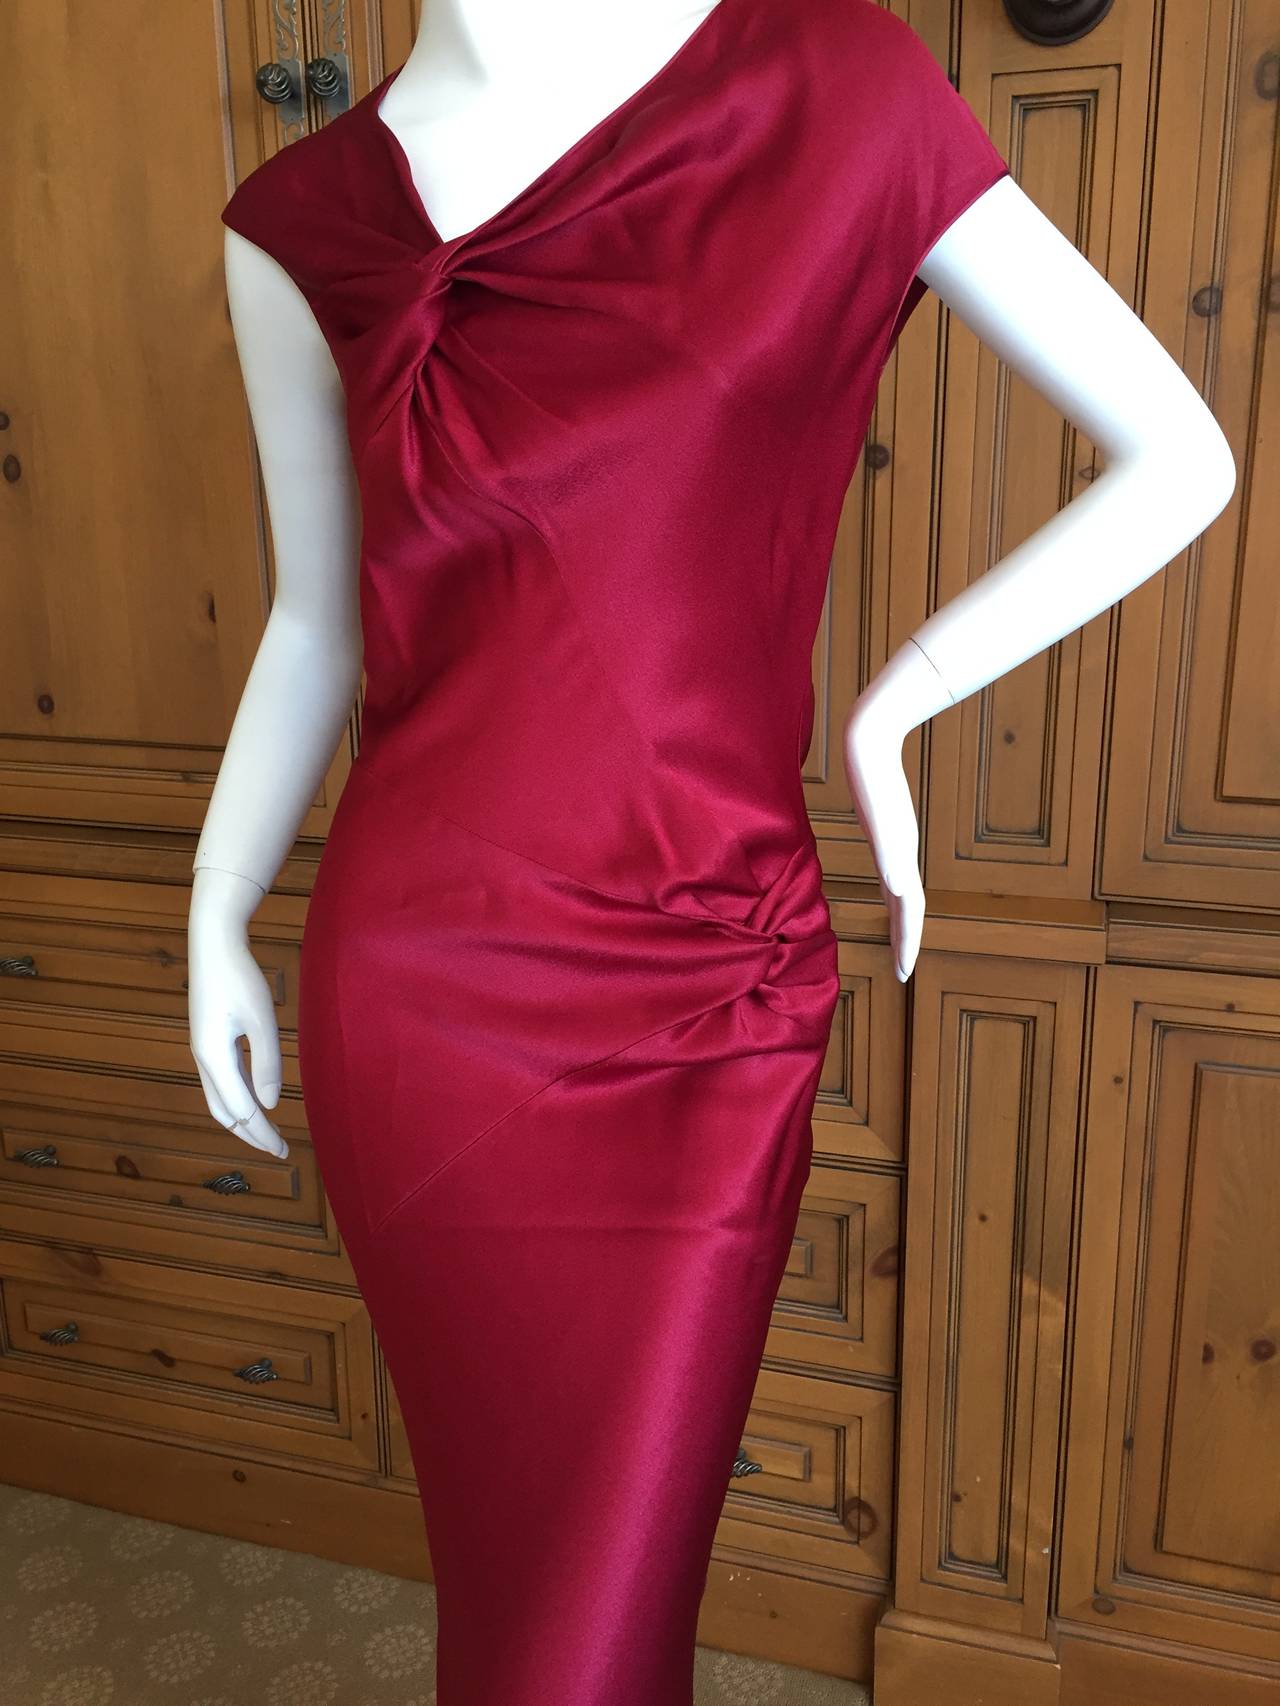 Deep burgundy red sleeveless dress with knot details from John Galliano.
Circa 1994
French size 40
Bust 40